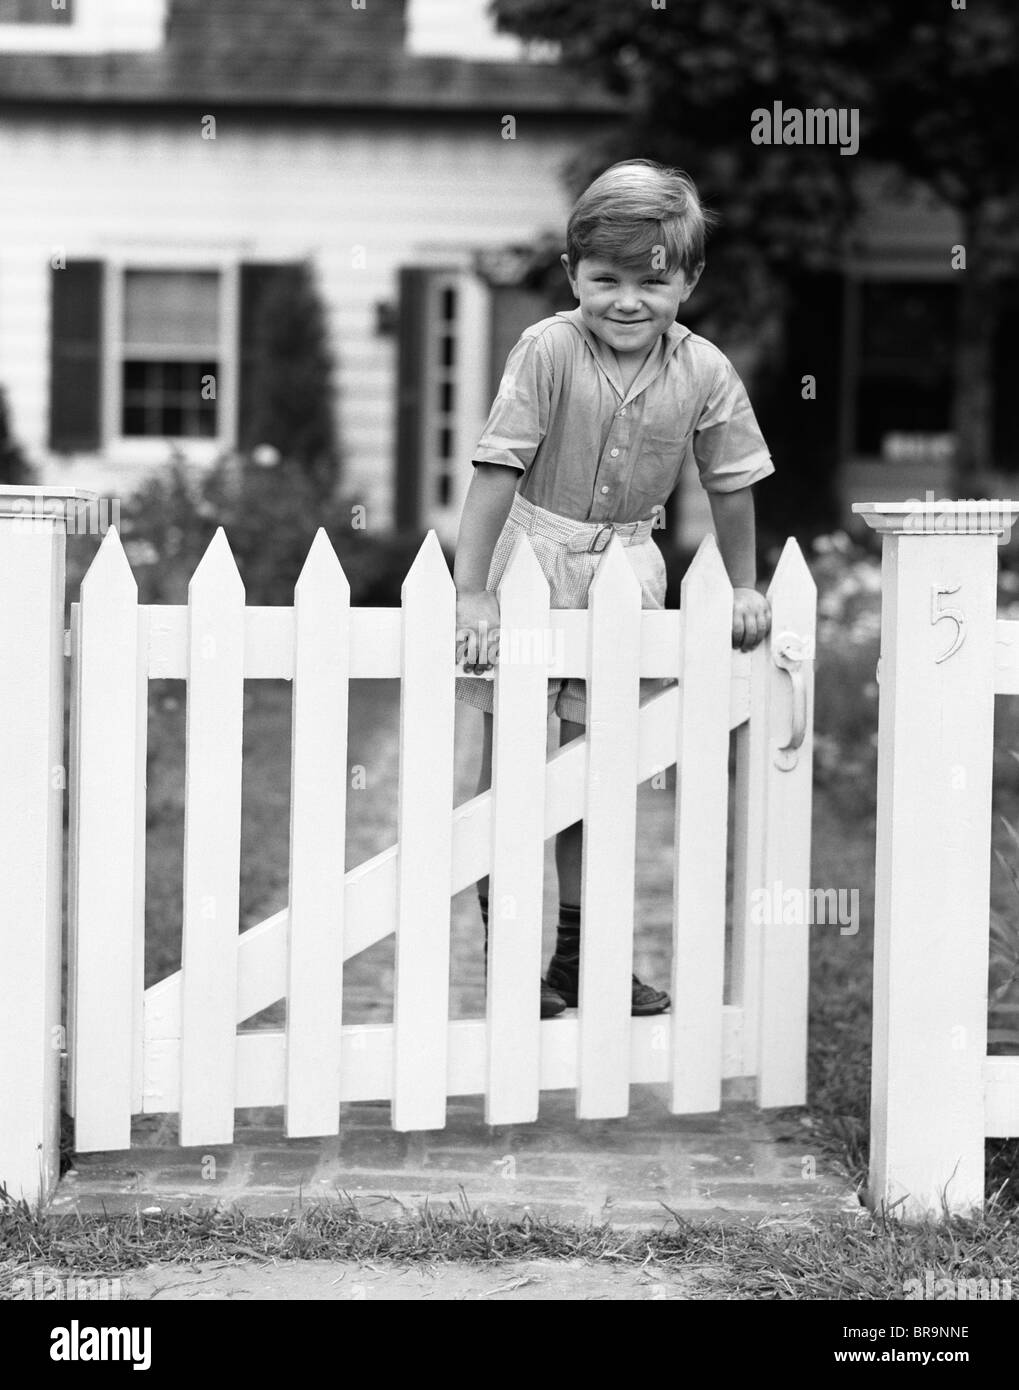 1940s CHILD STANDING ON FENCE SMILING LOOKING AT CAMERA Stock Photo